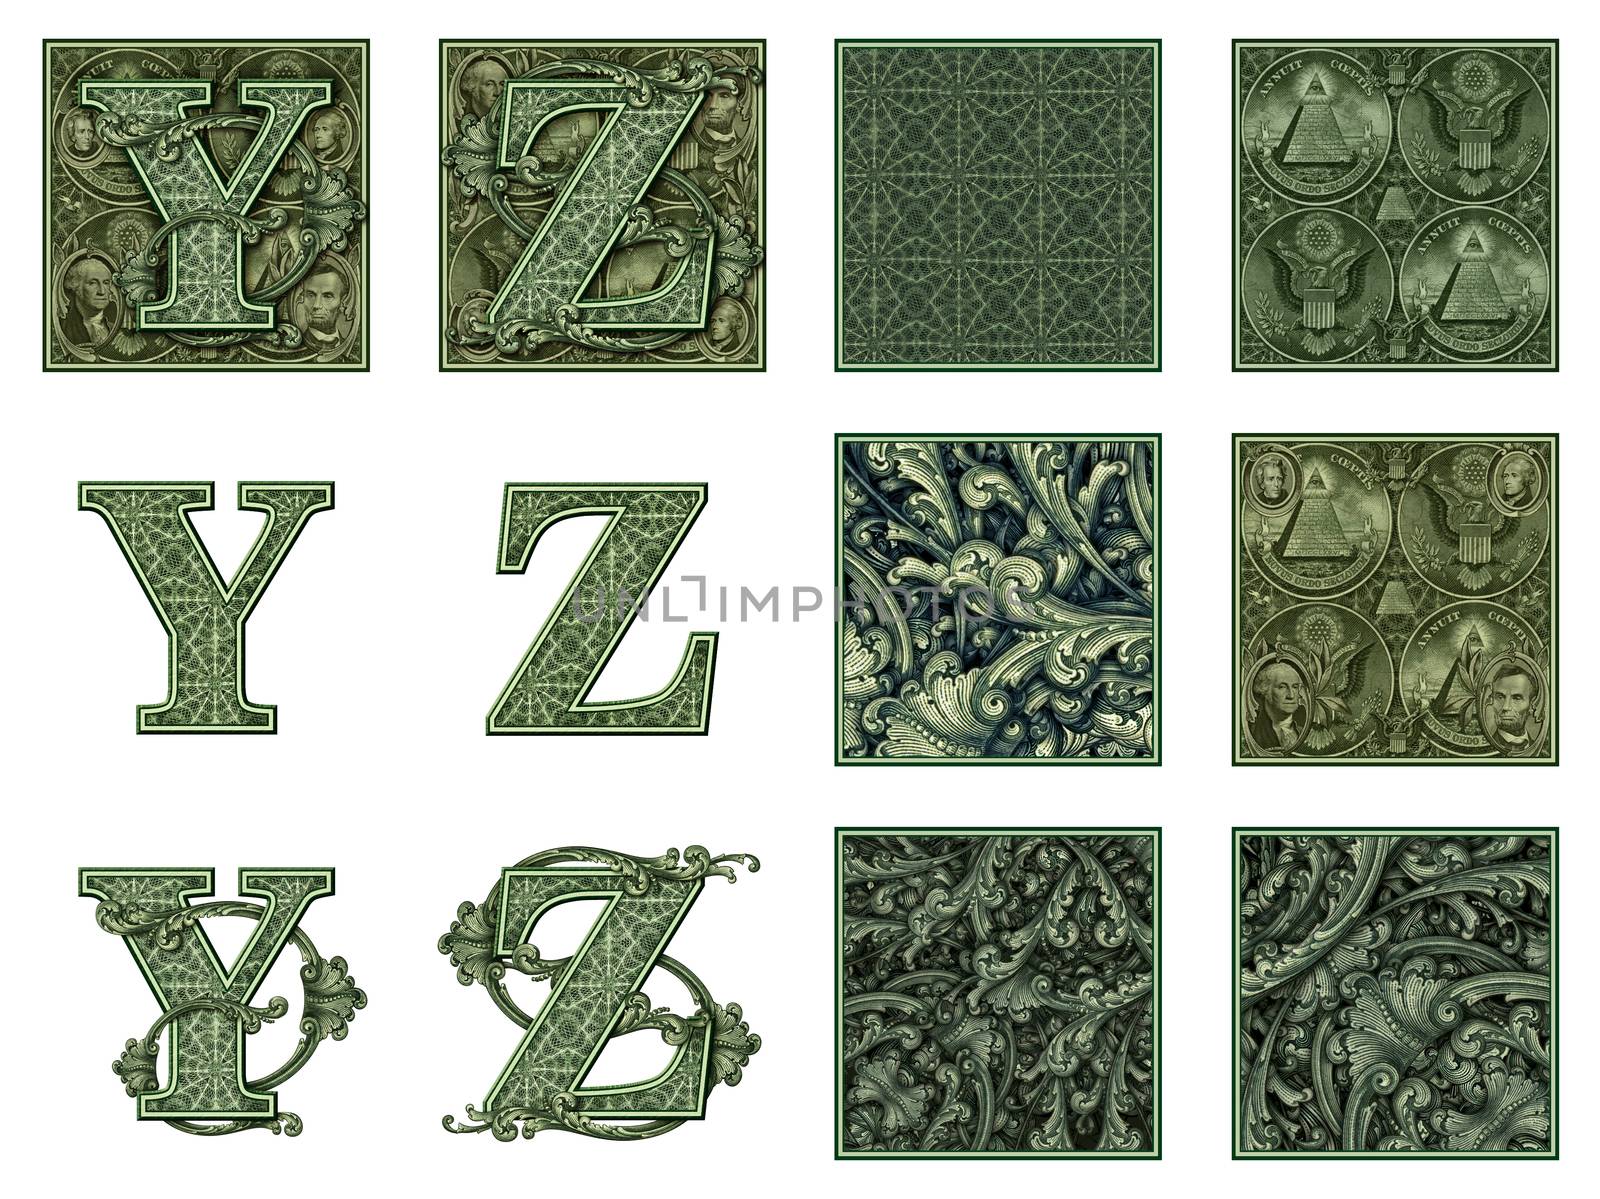 Photo-Illustration using parts of U.S. currency bills retouched and re-illustrated to create a new Money-themed alphabet. Eight total files can be downloaded to get a complete set.